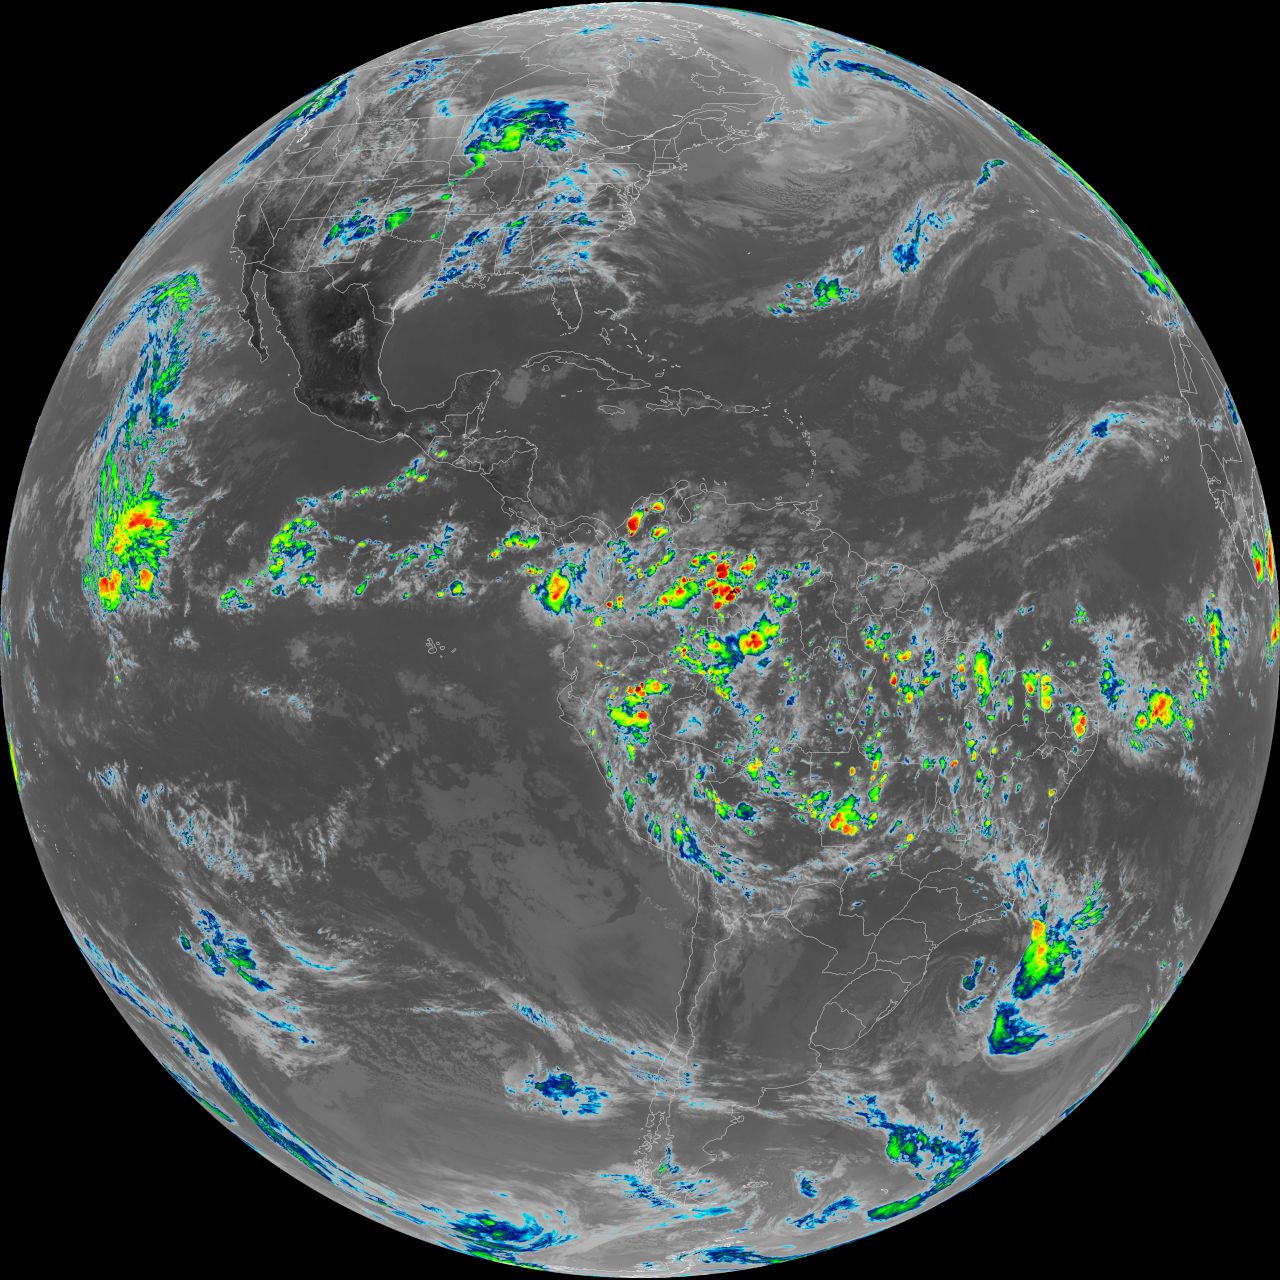 Full disk image recieved from GOES 16.